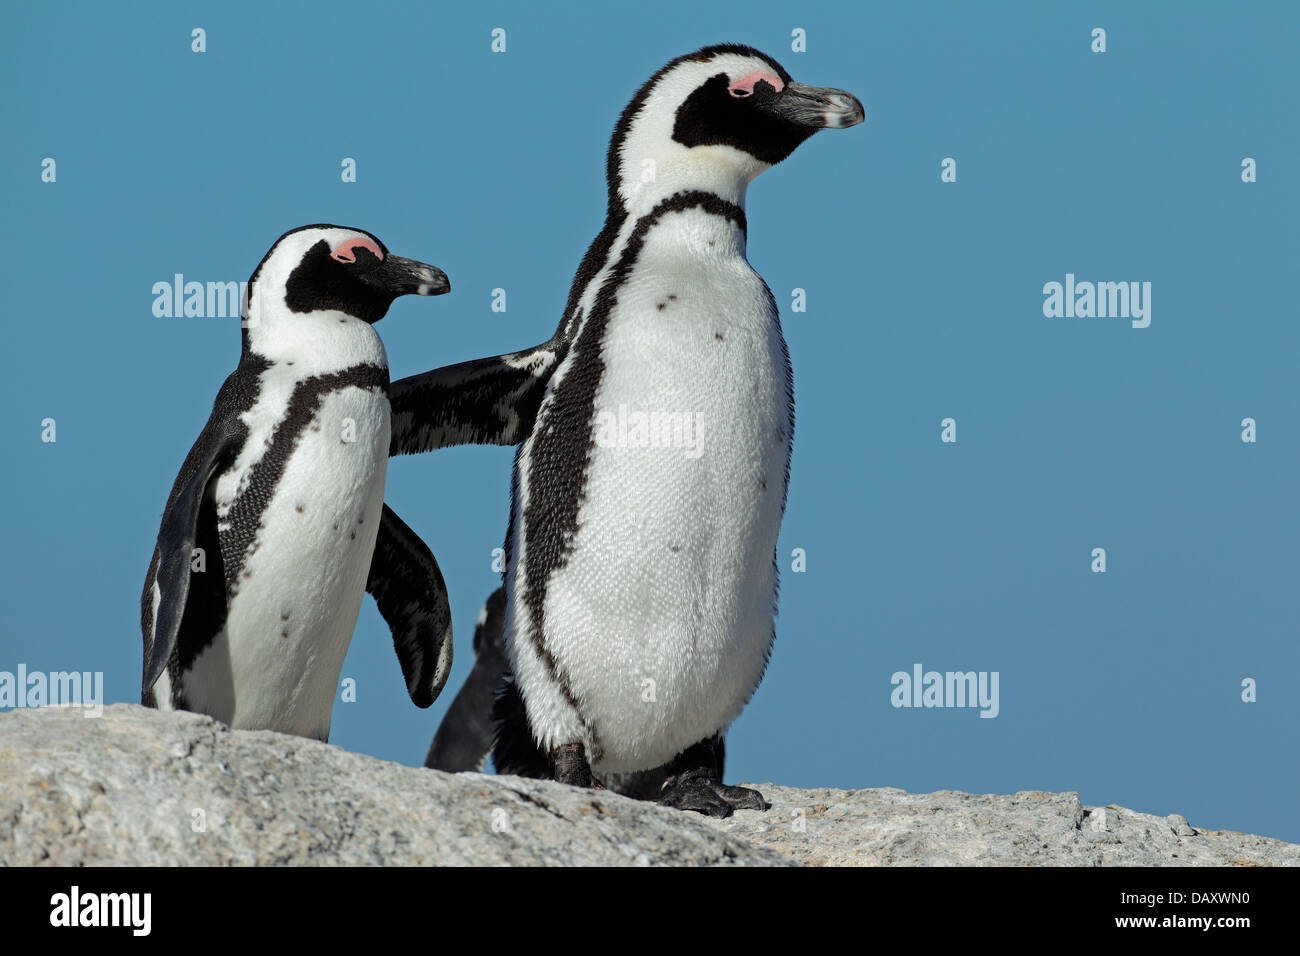 Pair of African penguins (Spheniscus demersus) against a blue sky, Western Cape, South Africa Stock Photo